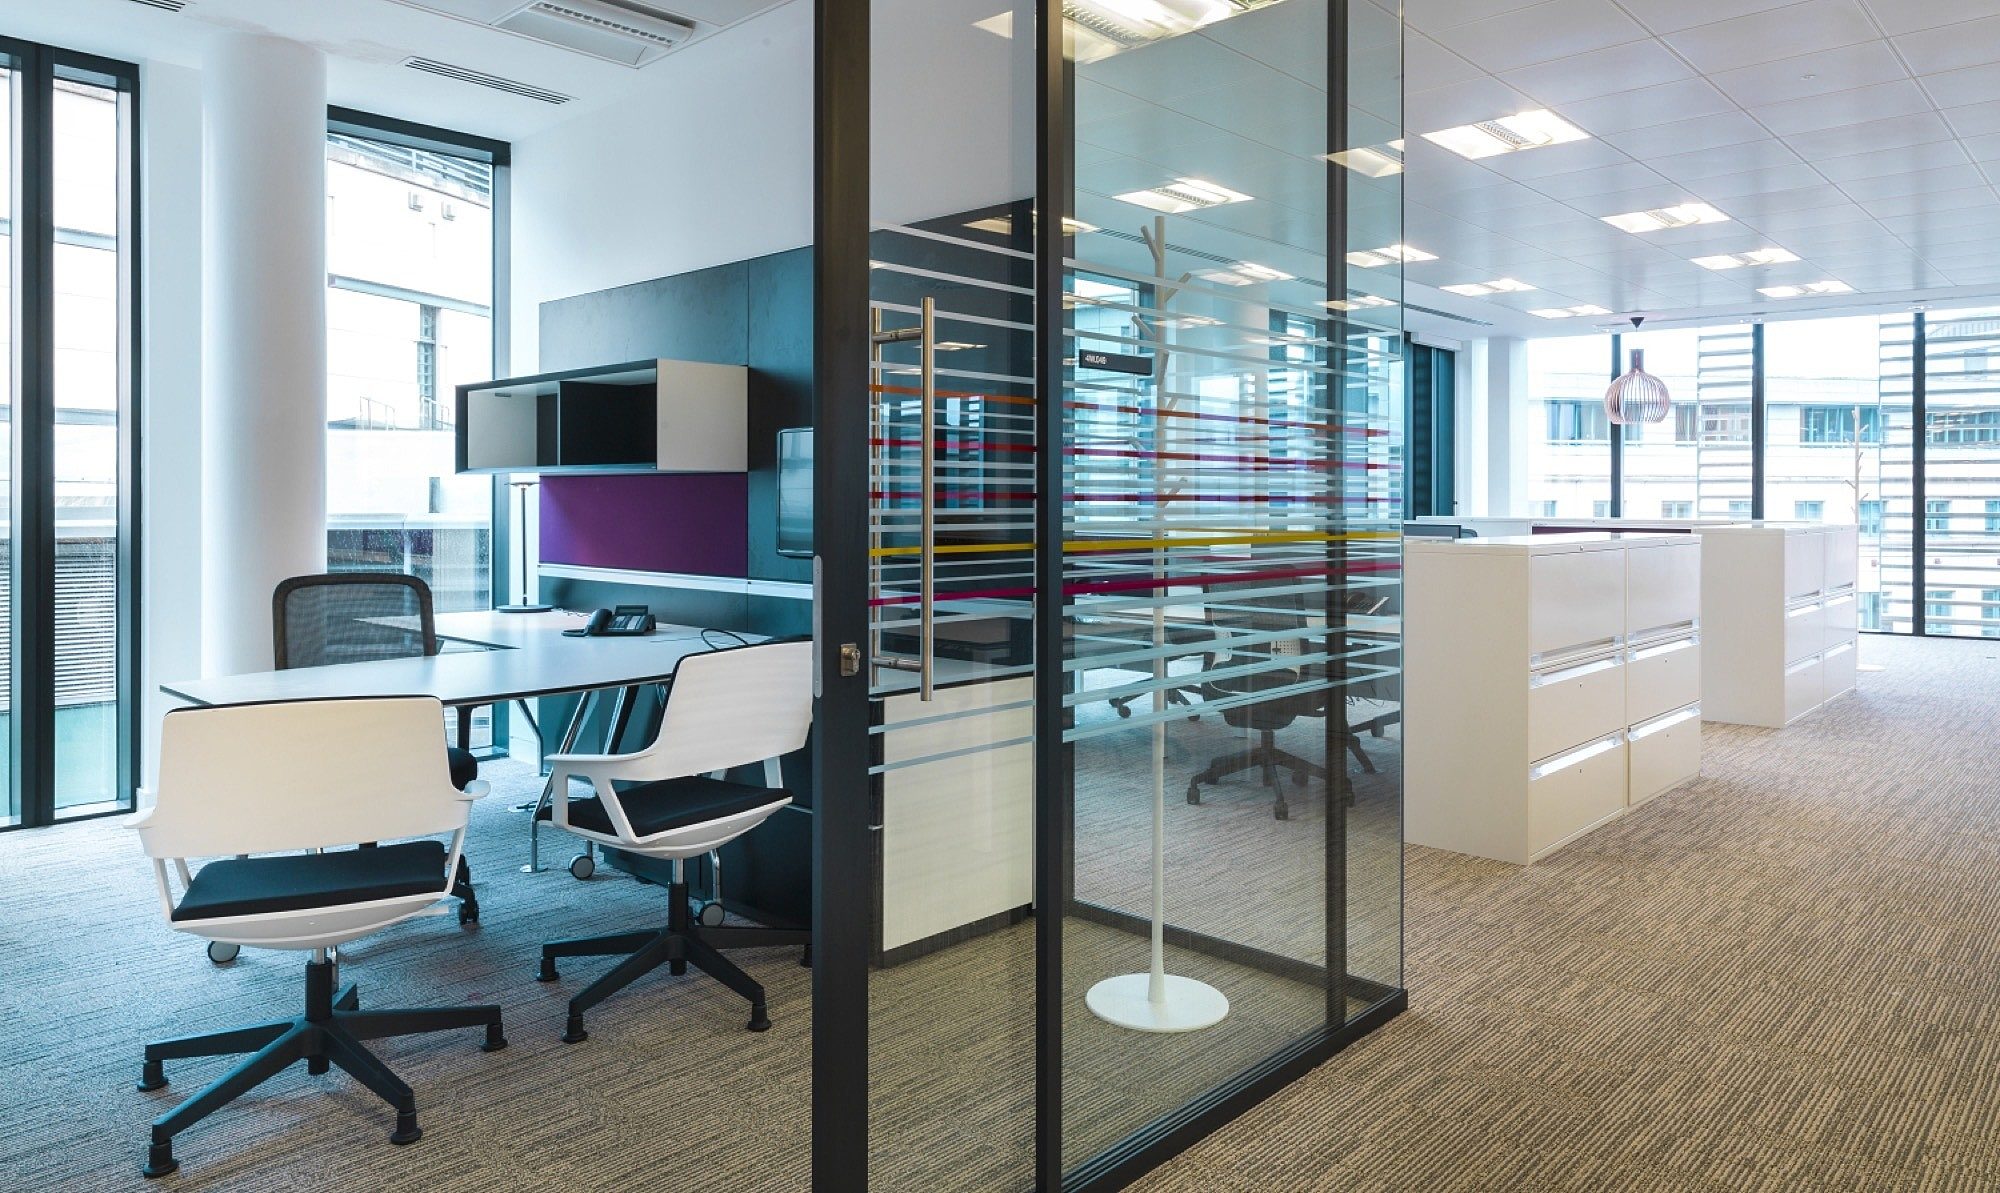 PwC office fit out for collaboration